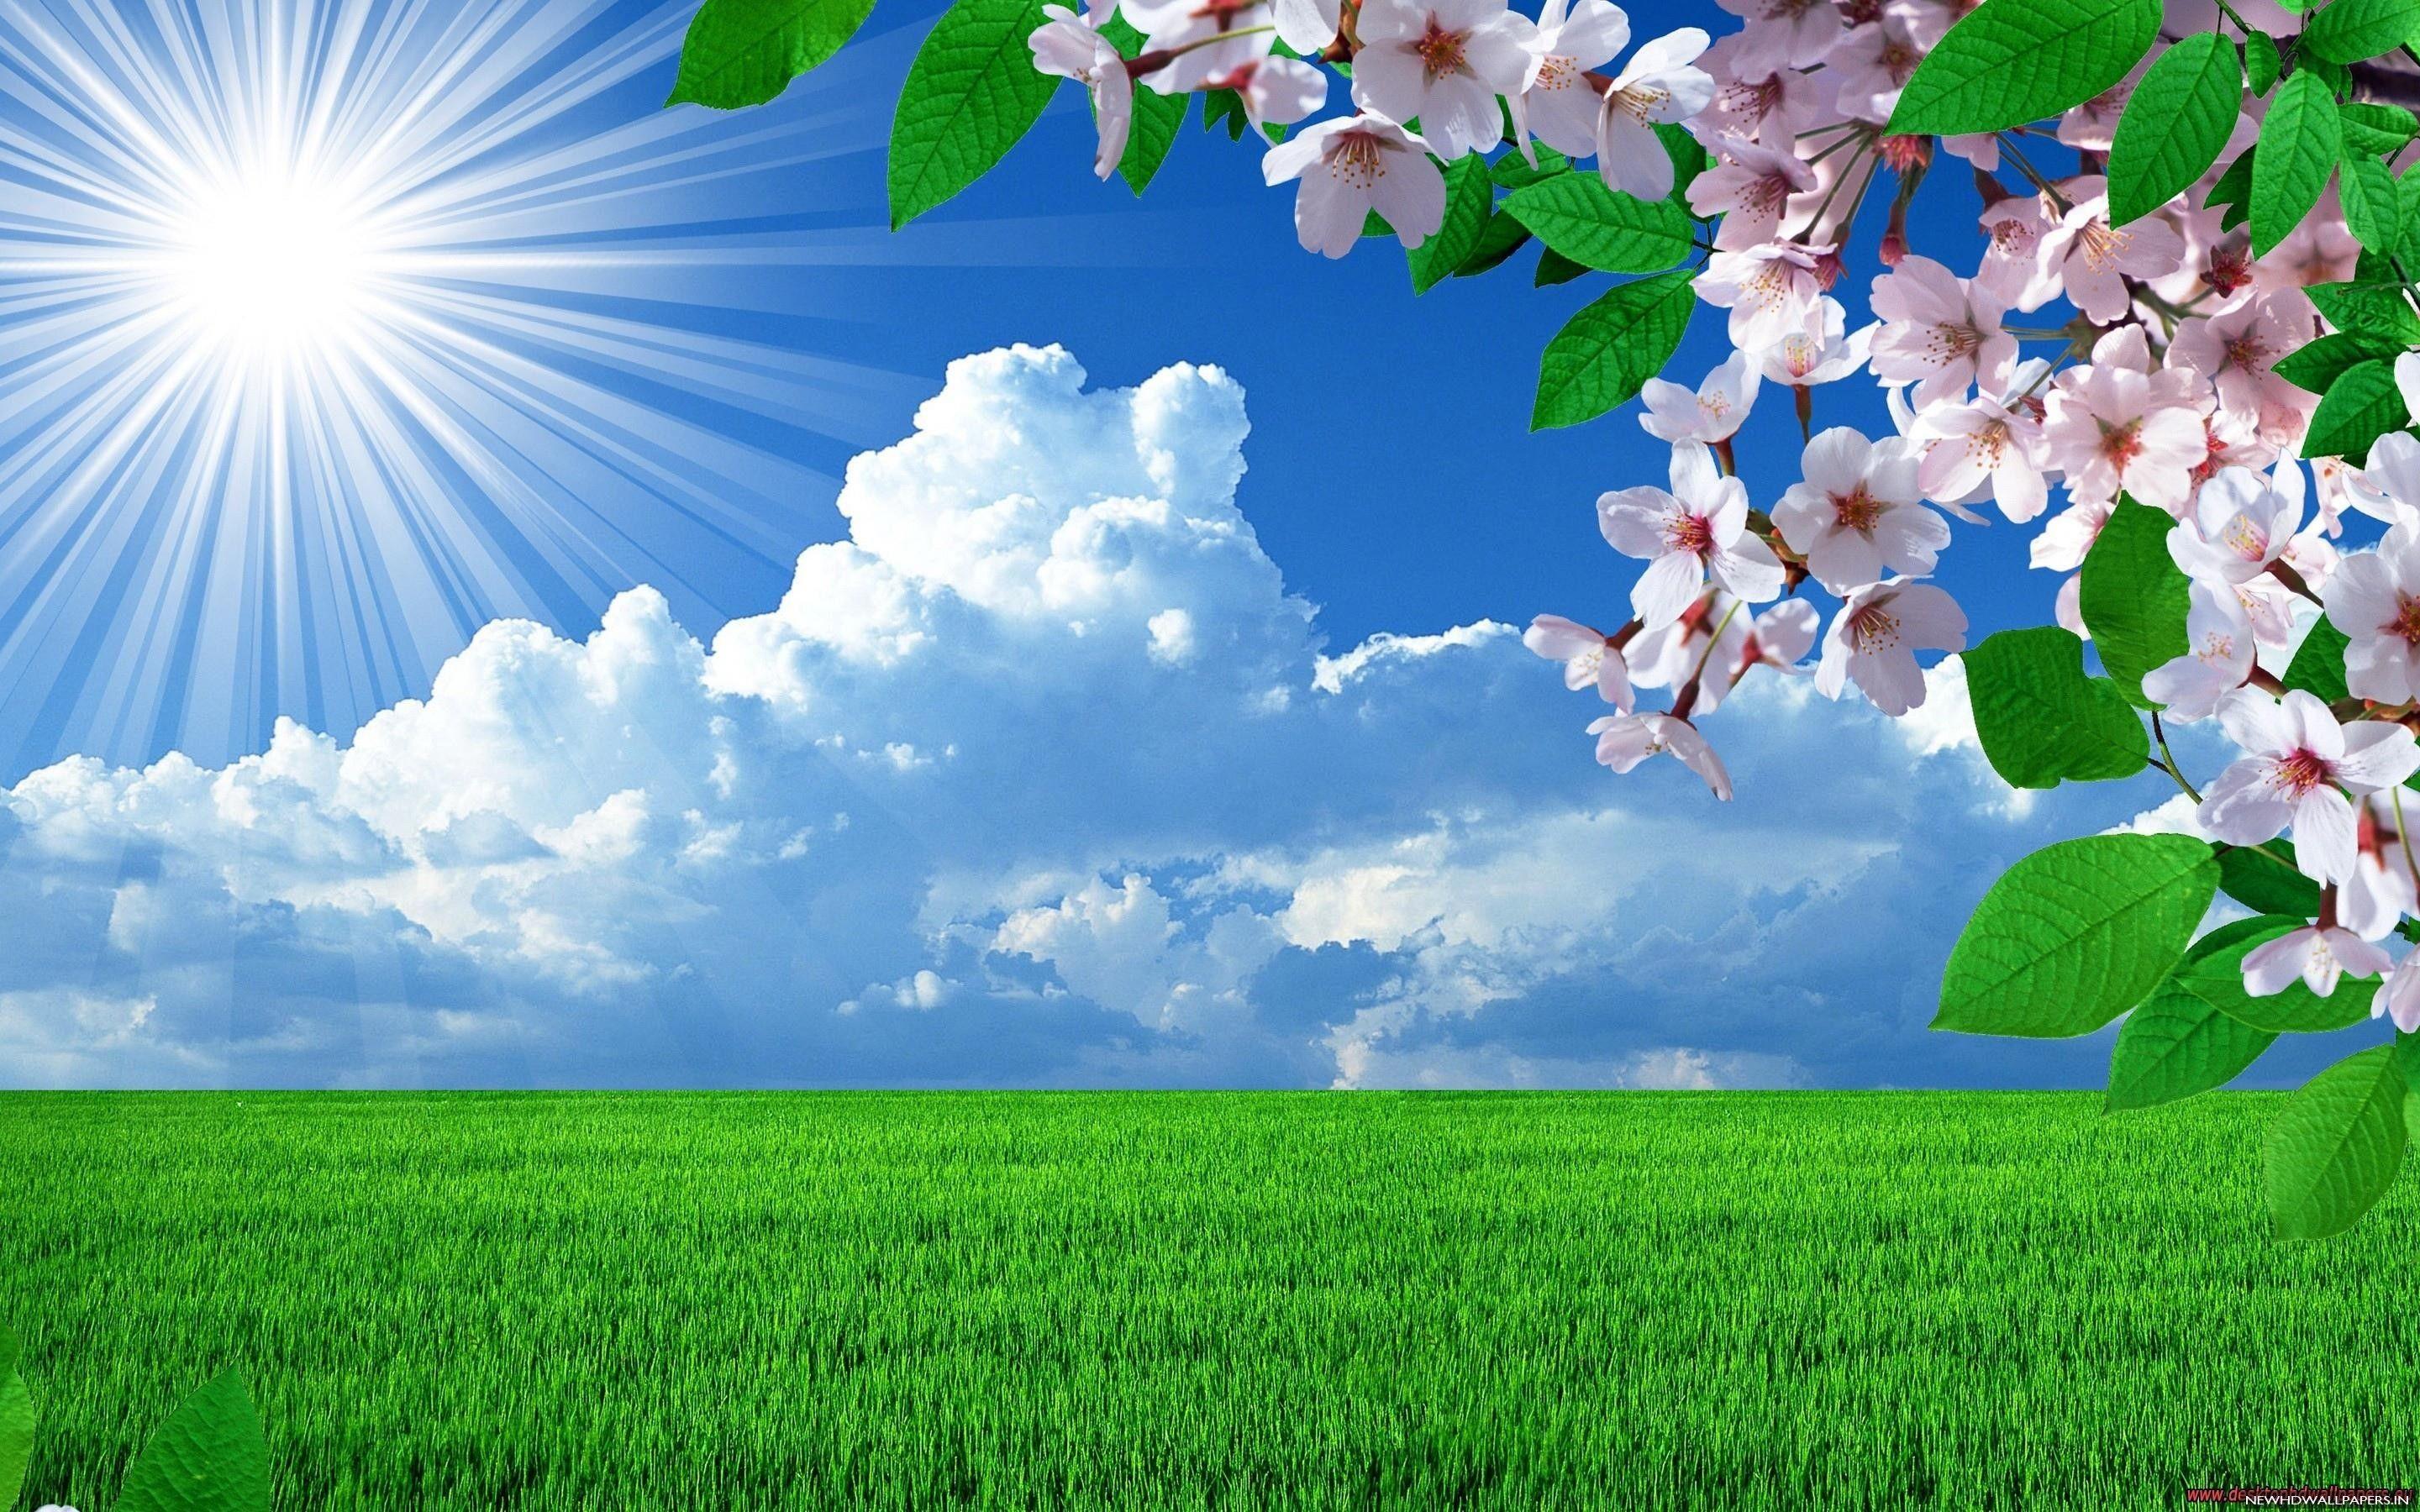 Background Image Of Nature And Flowers Collection On Free Desktop